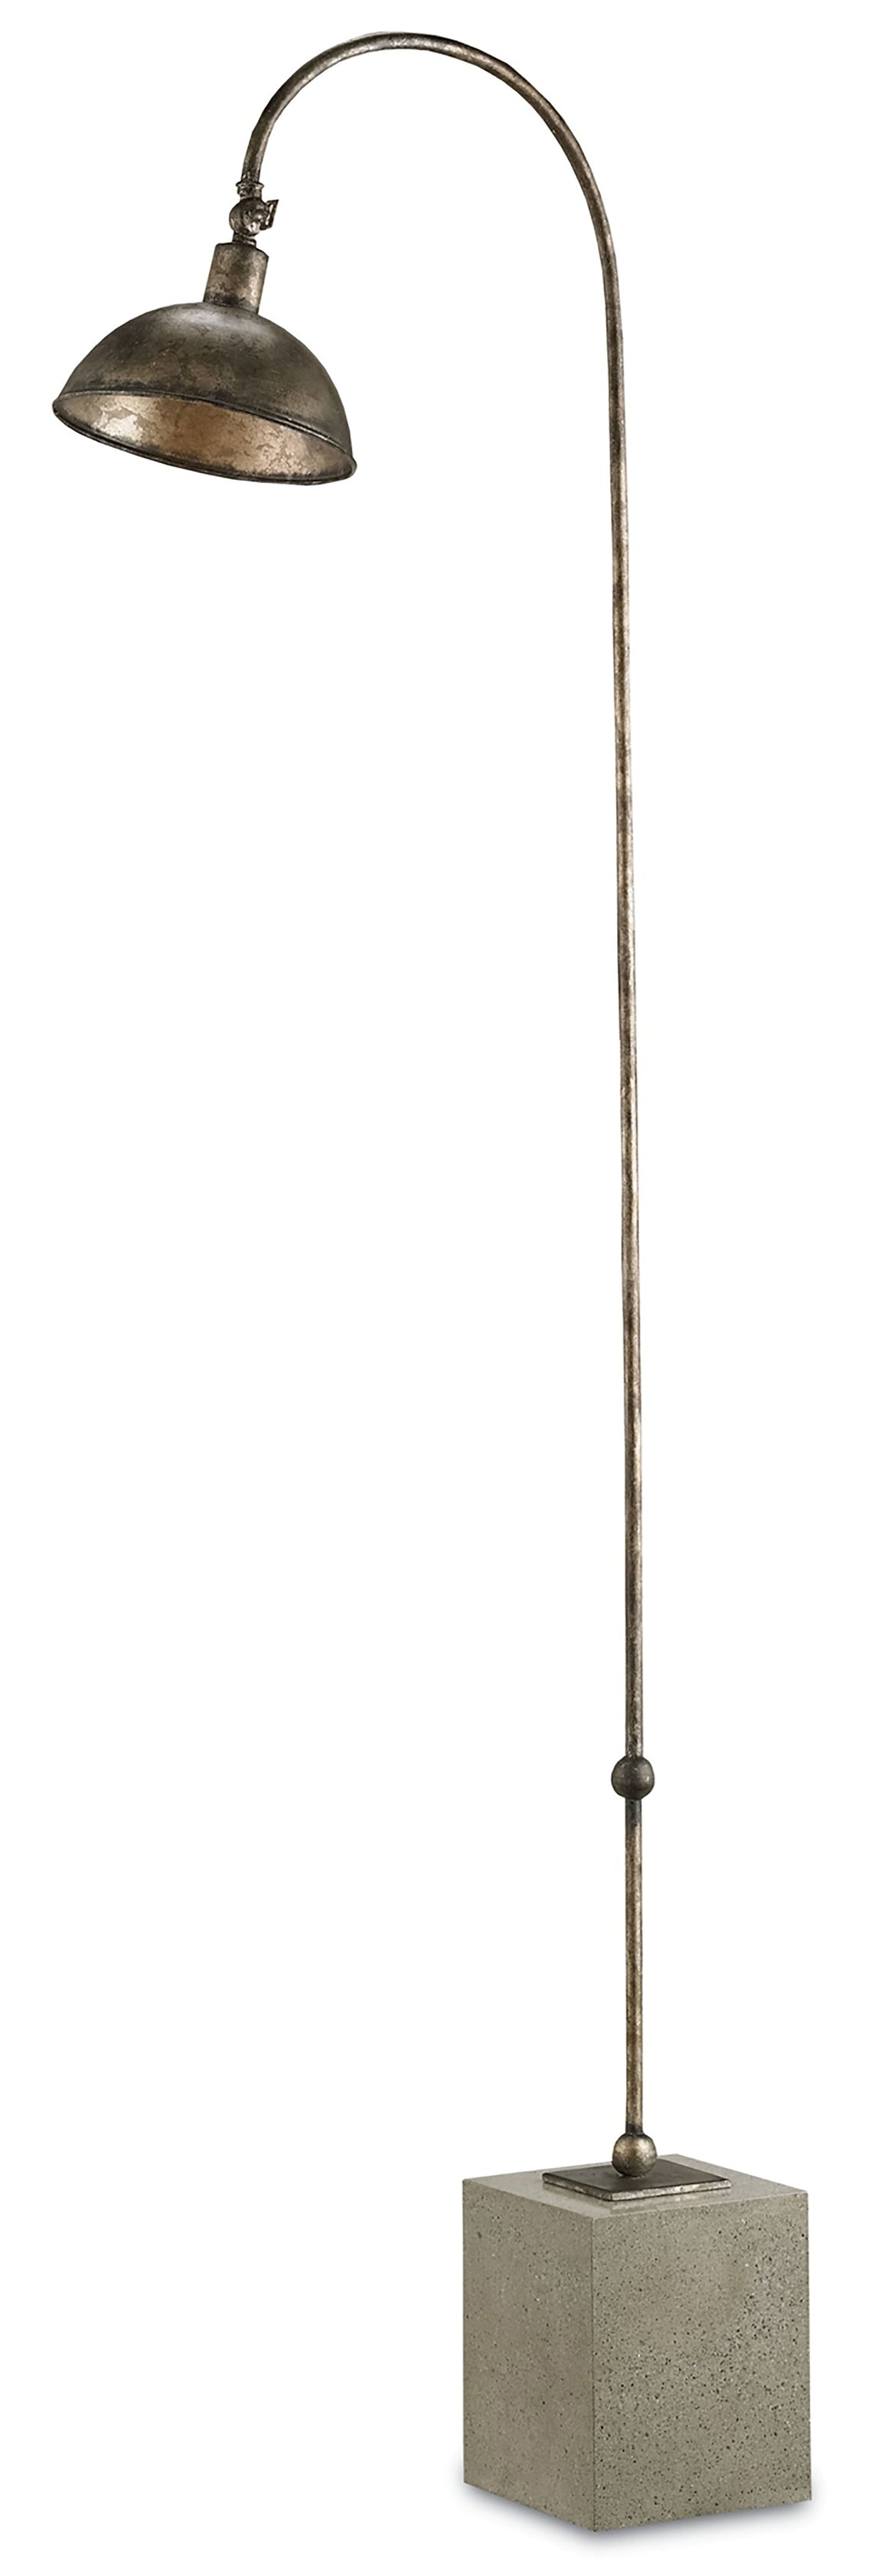 Currey and Company Finstock Floor Lamp